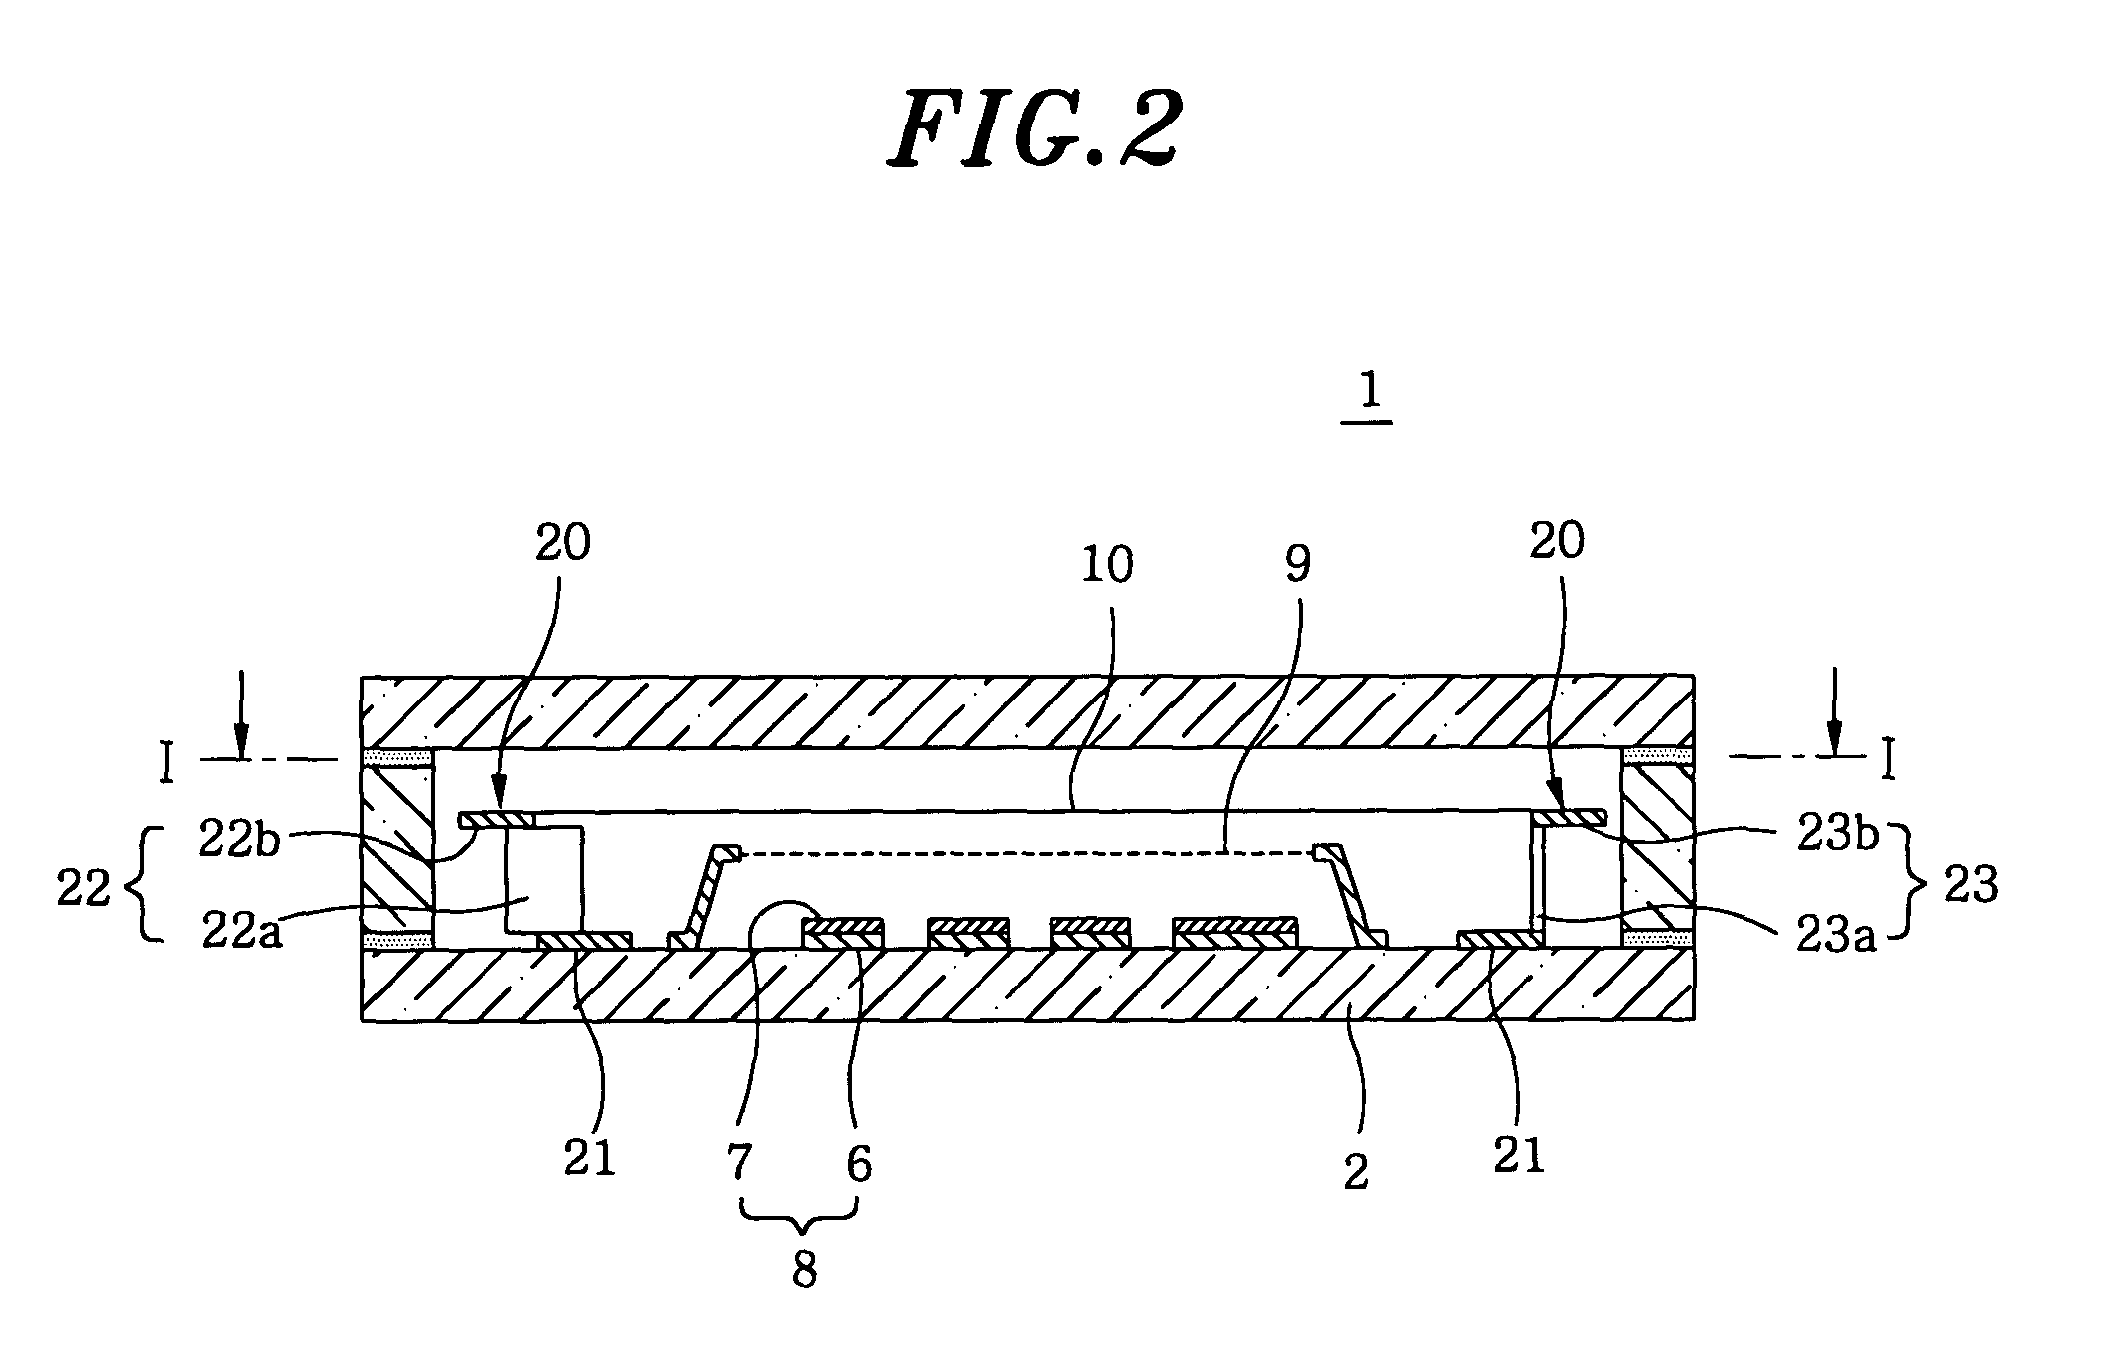 Vacuum fluorescent display device and the support of the cathode thereof